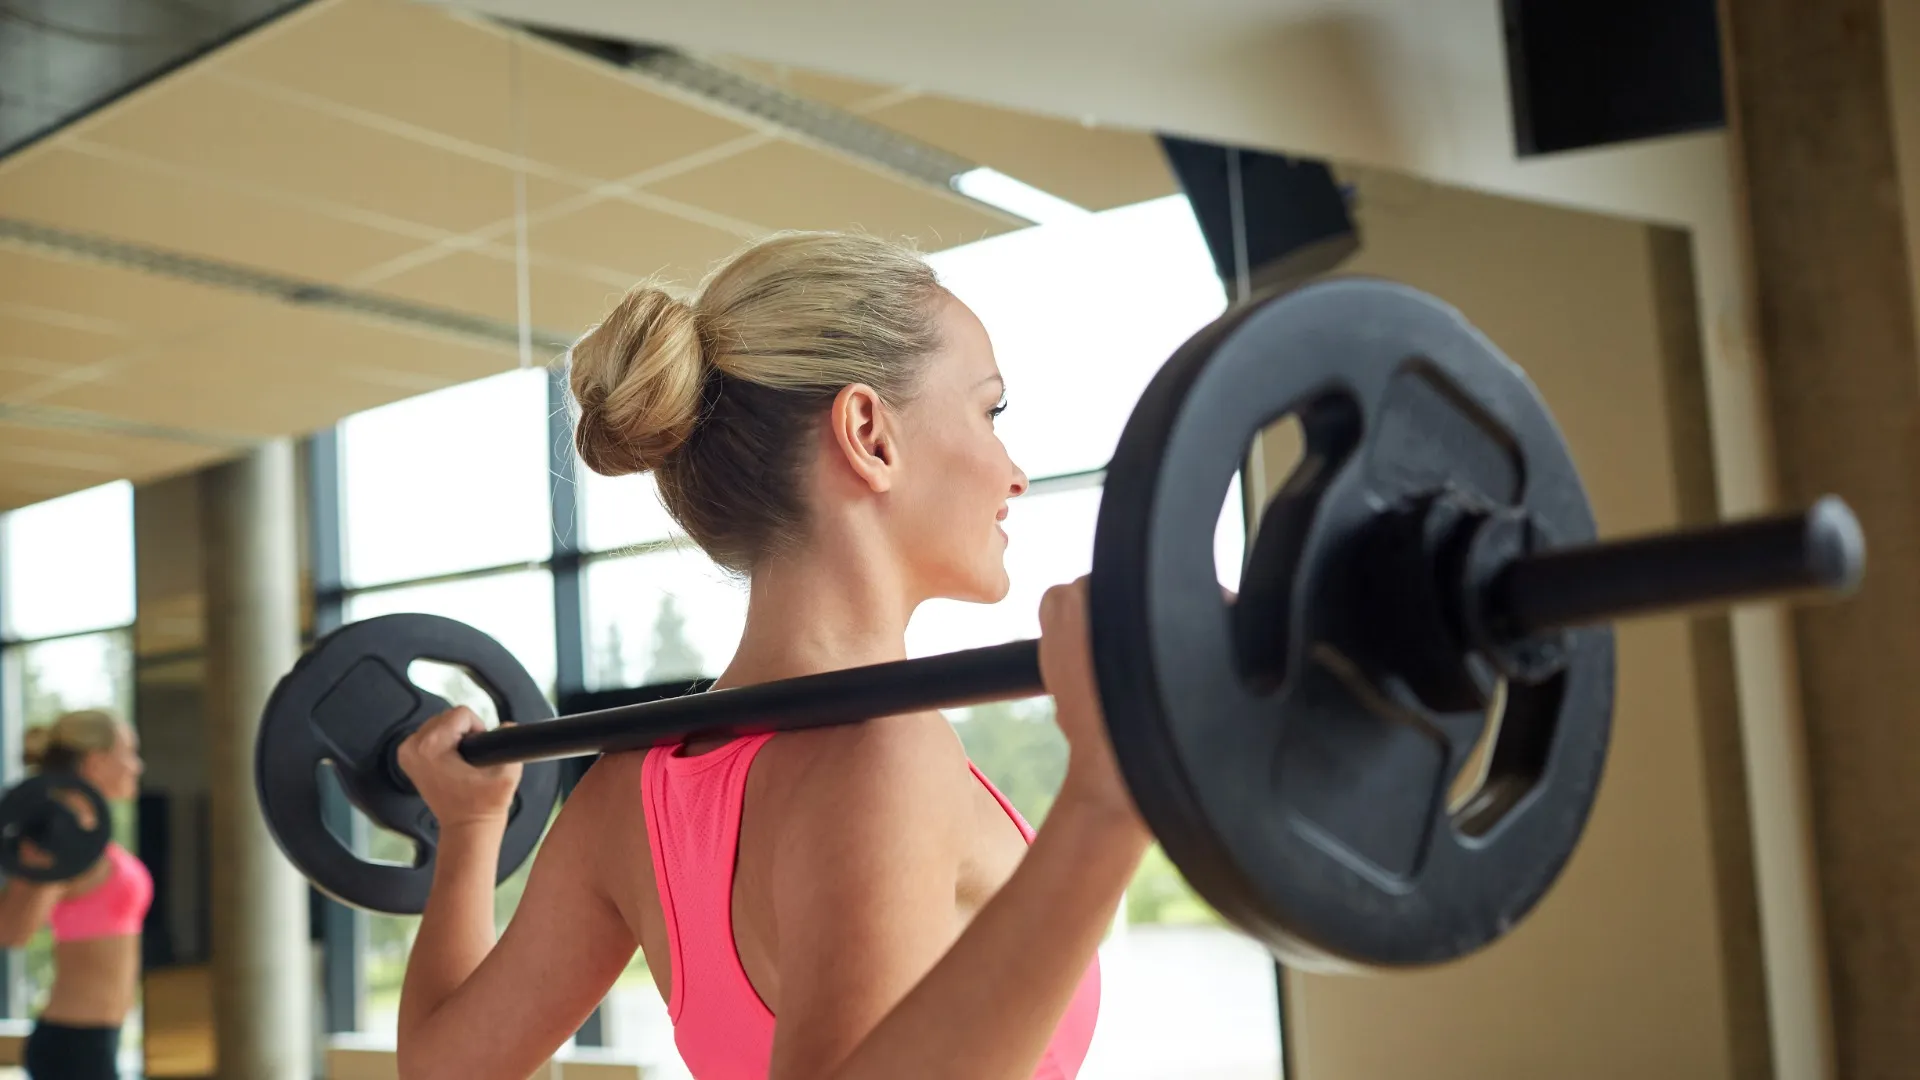 Ladies, Is Your Exercise Routine Depleting Some of Your Hormones?